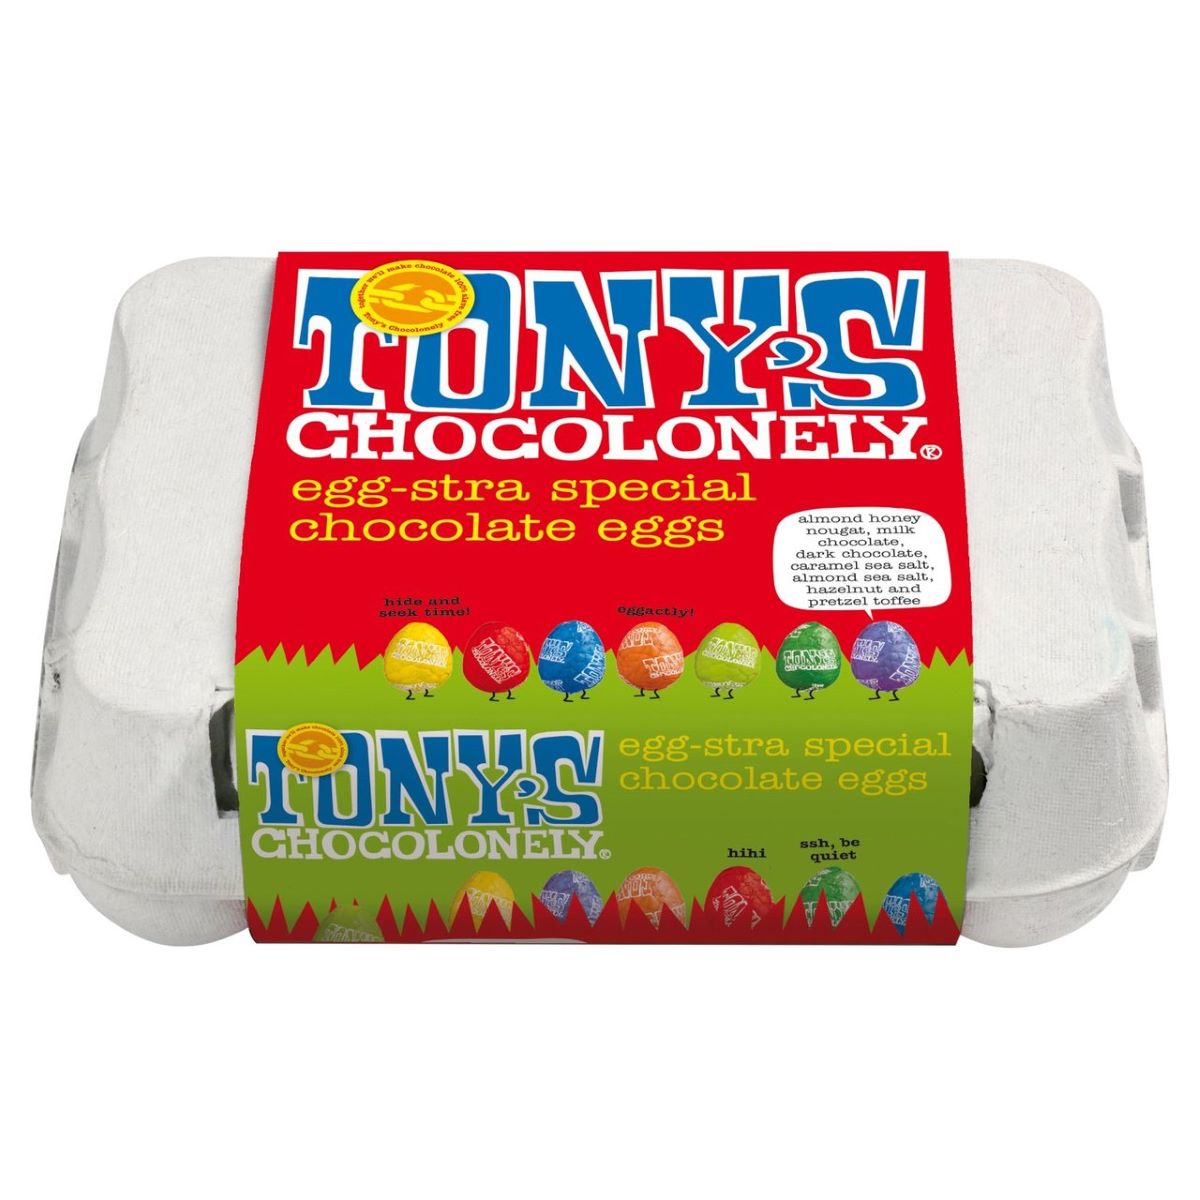 Tony's Chocolonely Egg-Stra Special Chocolate Eggs 150g